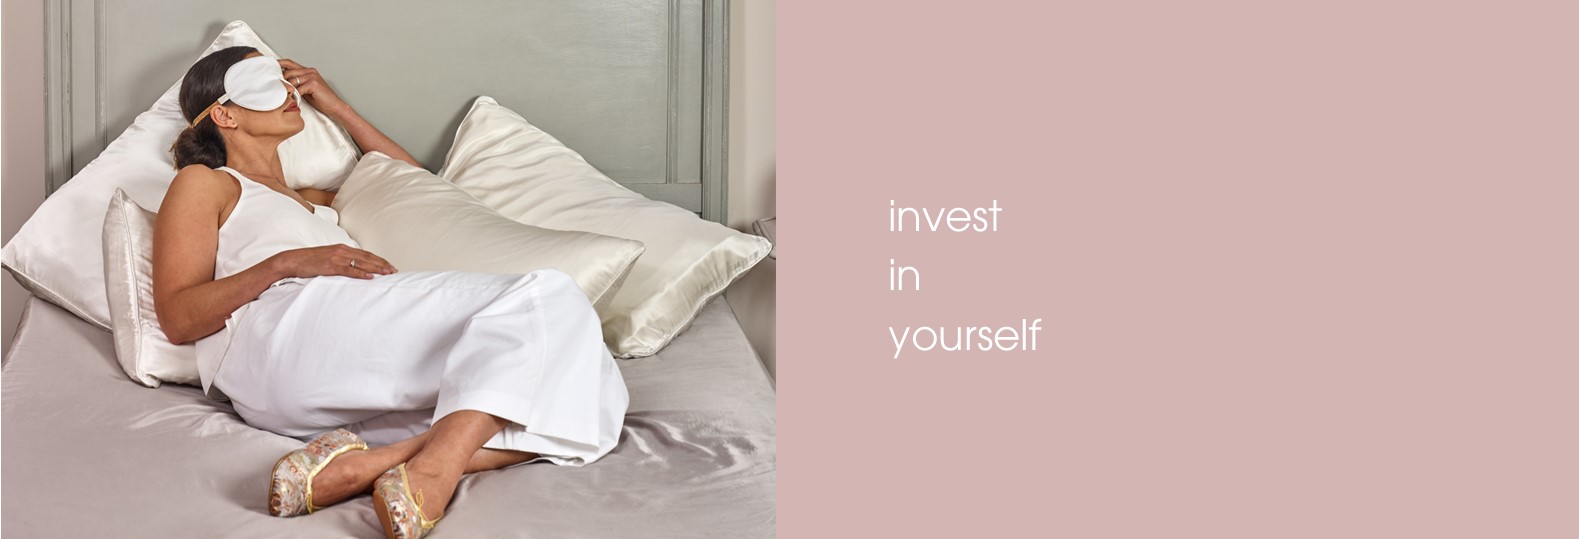 HOLISTIC SILK RETREAT INVEST IN YOURSELF